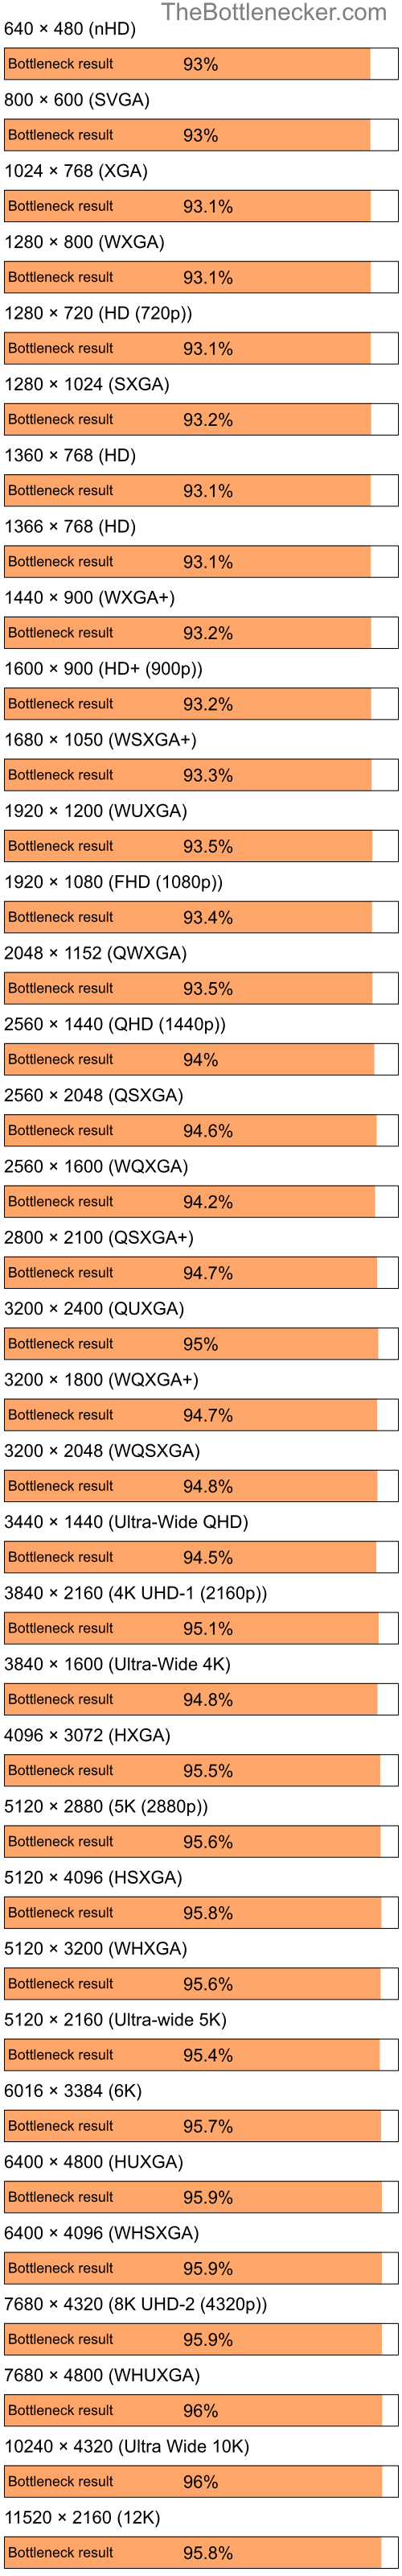 Bottleneck results by resolution for Intel Atom Z520 and AMD Radeon IGP 345M in Graphic Card Intense Tasks